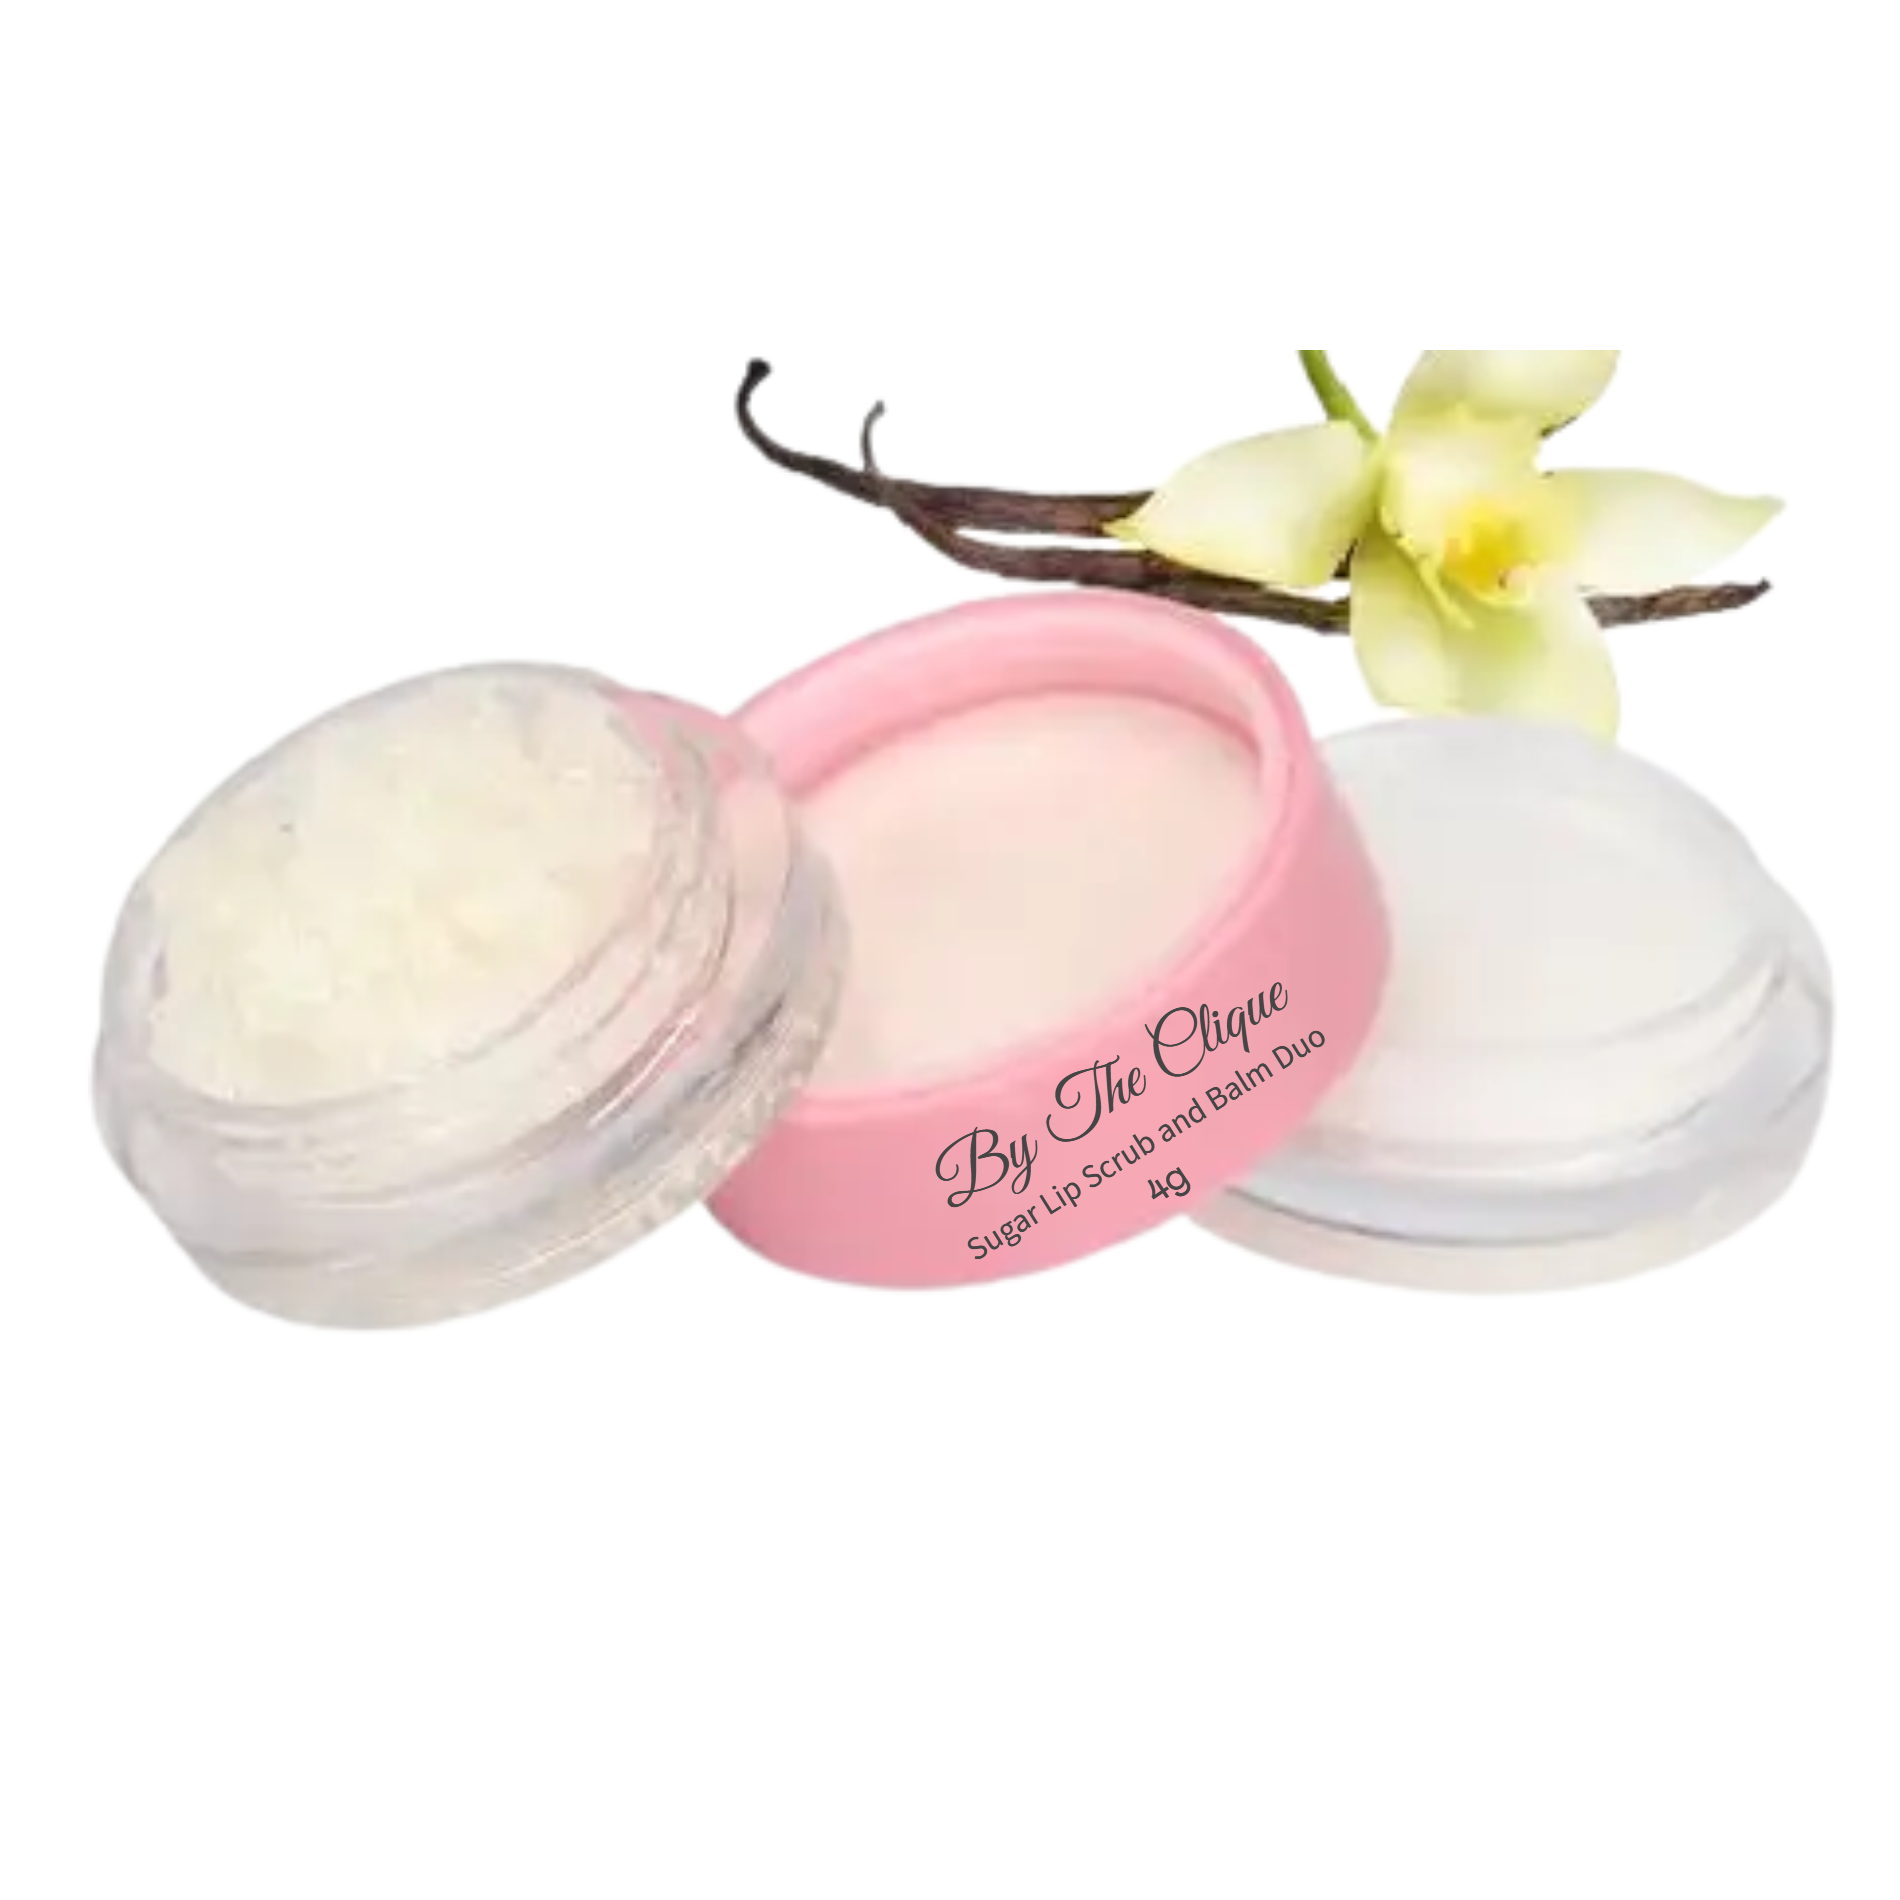 By The Clique Premium 2 in 1 Exfoliating Sugar Lip Scrub and Smoothing Lip Balm Duo | Natural Ingredients | Vanilla Sugar